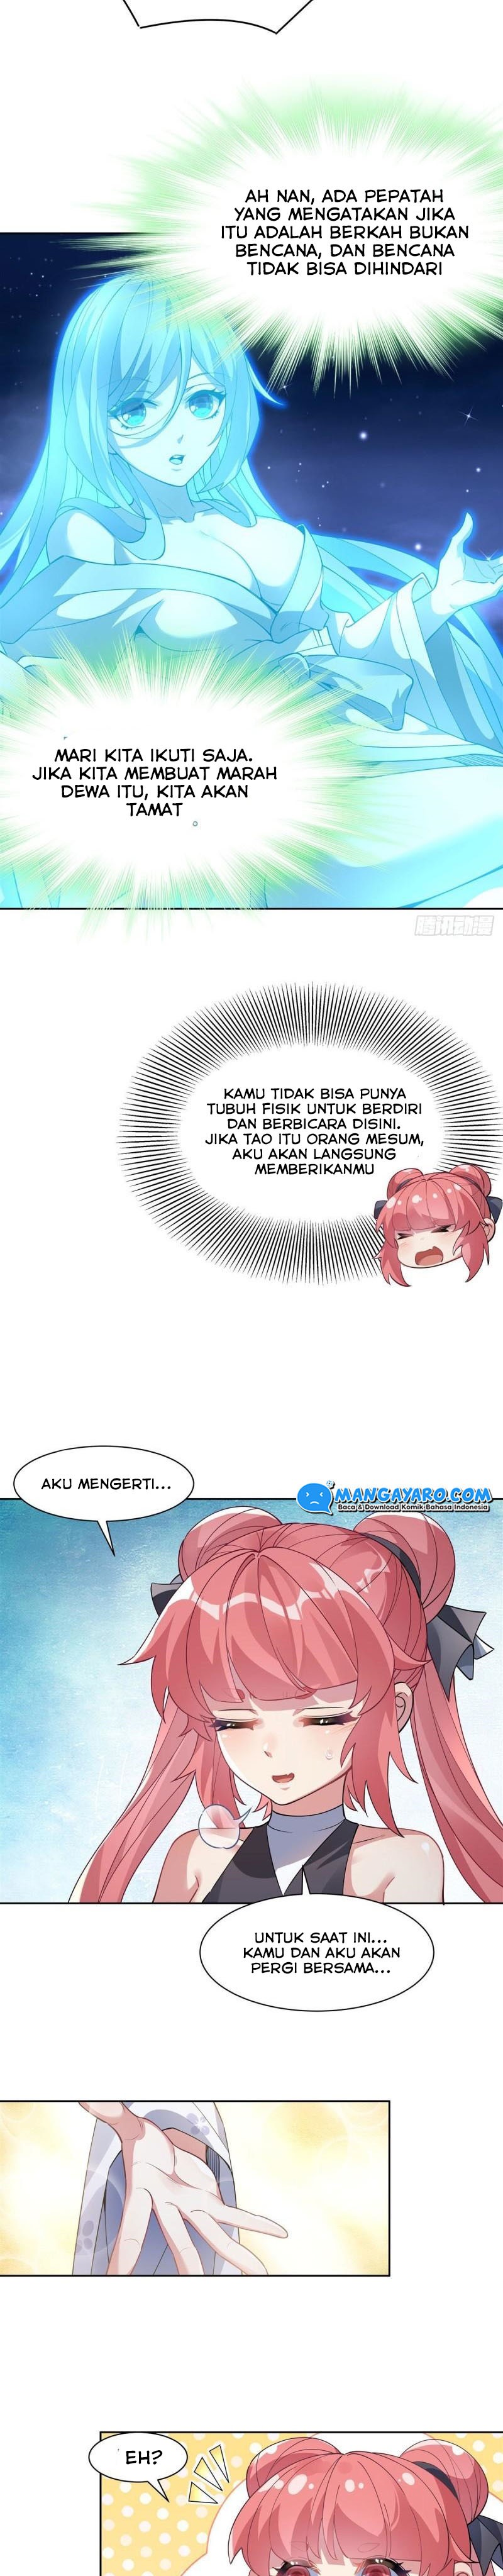 Dilarang COPAS - situs resmi www.mangacanblog.com - Komik my female apprentices are all big shots from the future 046 - chapter 46 47 Indonesia my female apprentices are all big shots from the future 046 - chapter 46 Terbaru 14|Baca Manga Komik Indonesia|Mangacan